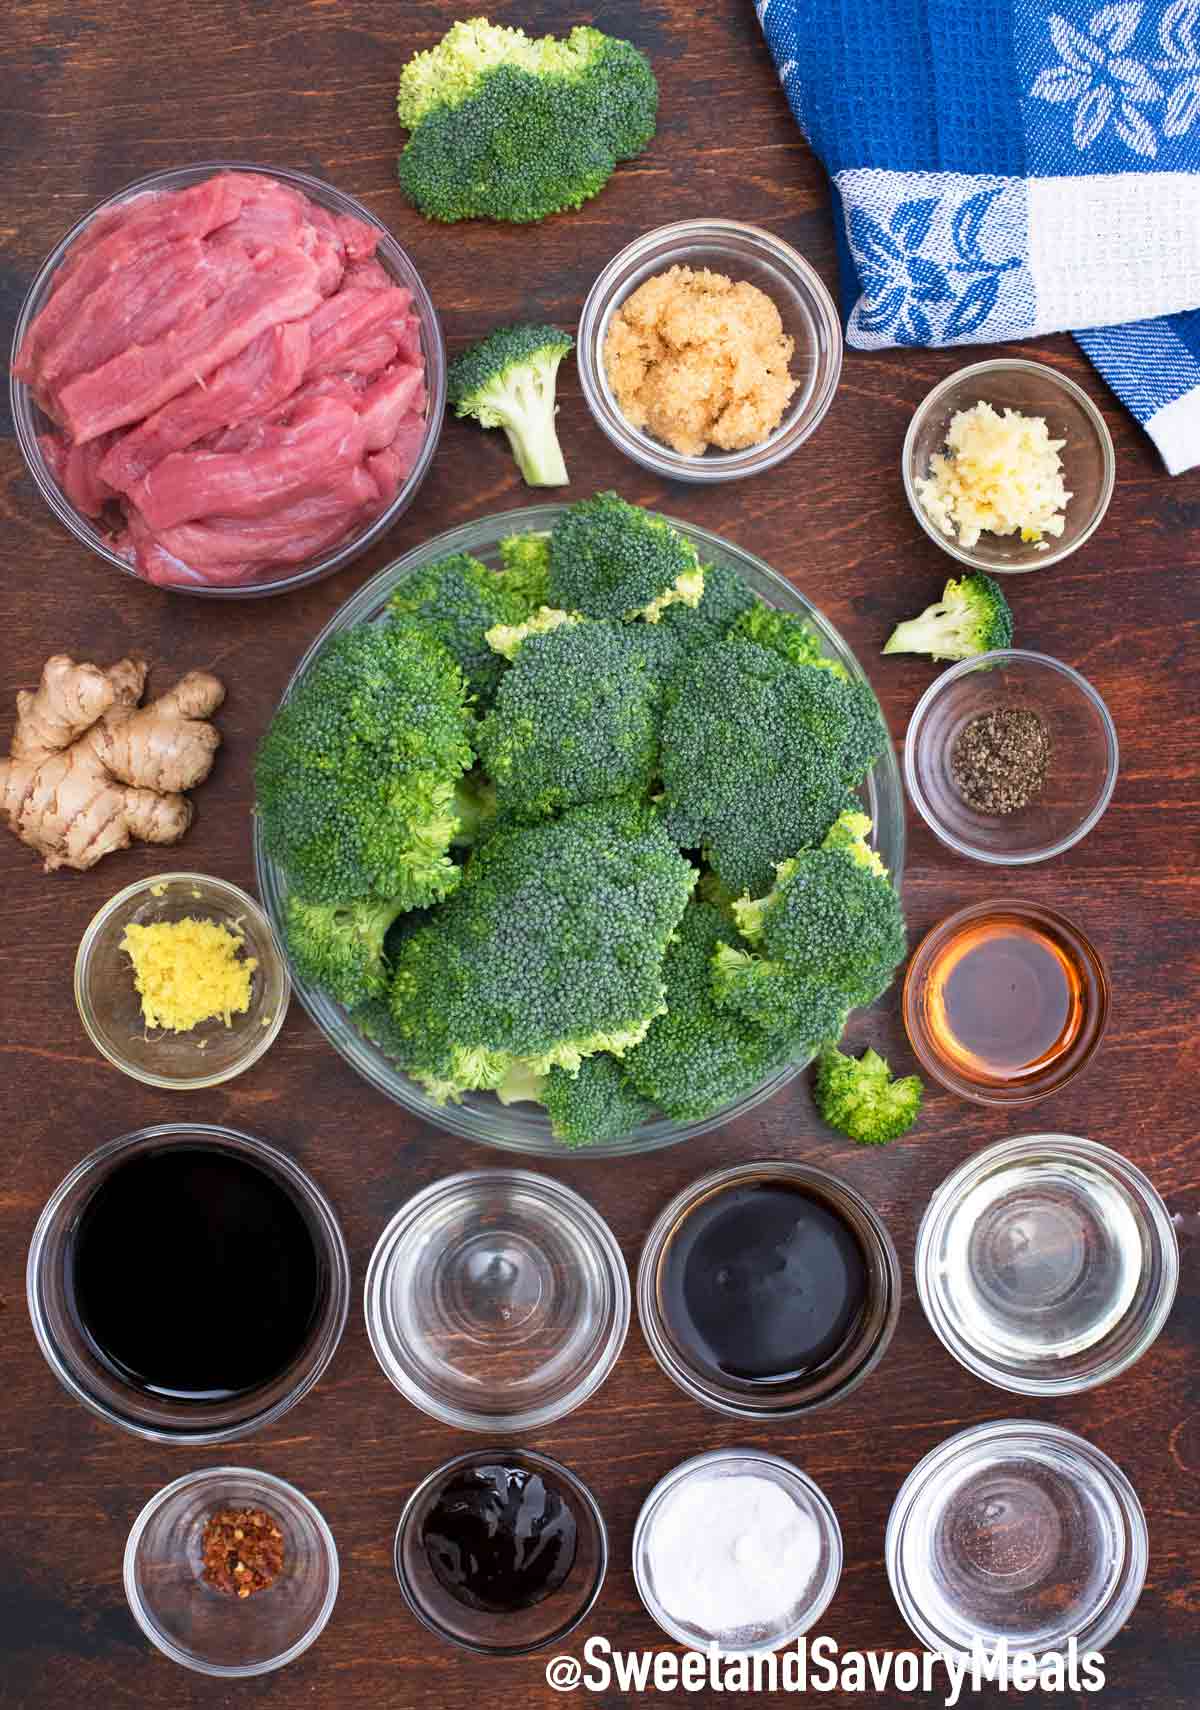 Panda Express Beef and Broccoli (Video) - Sweet and Savory Meals